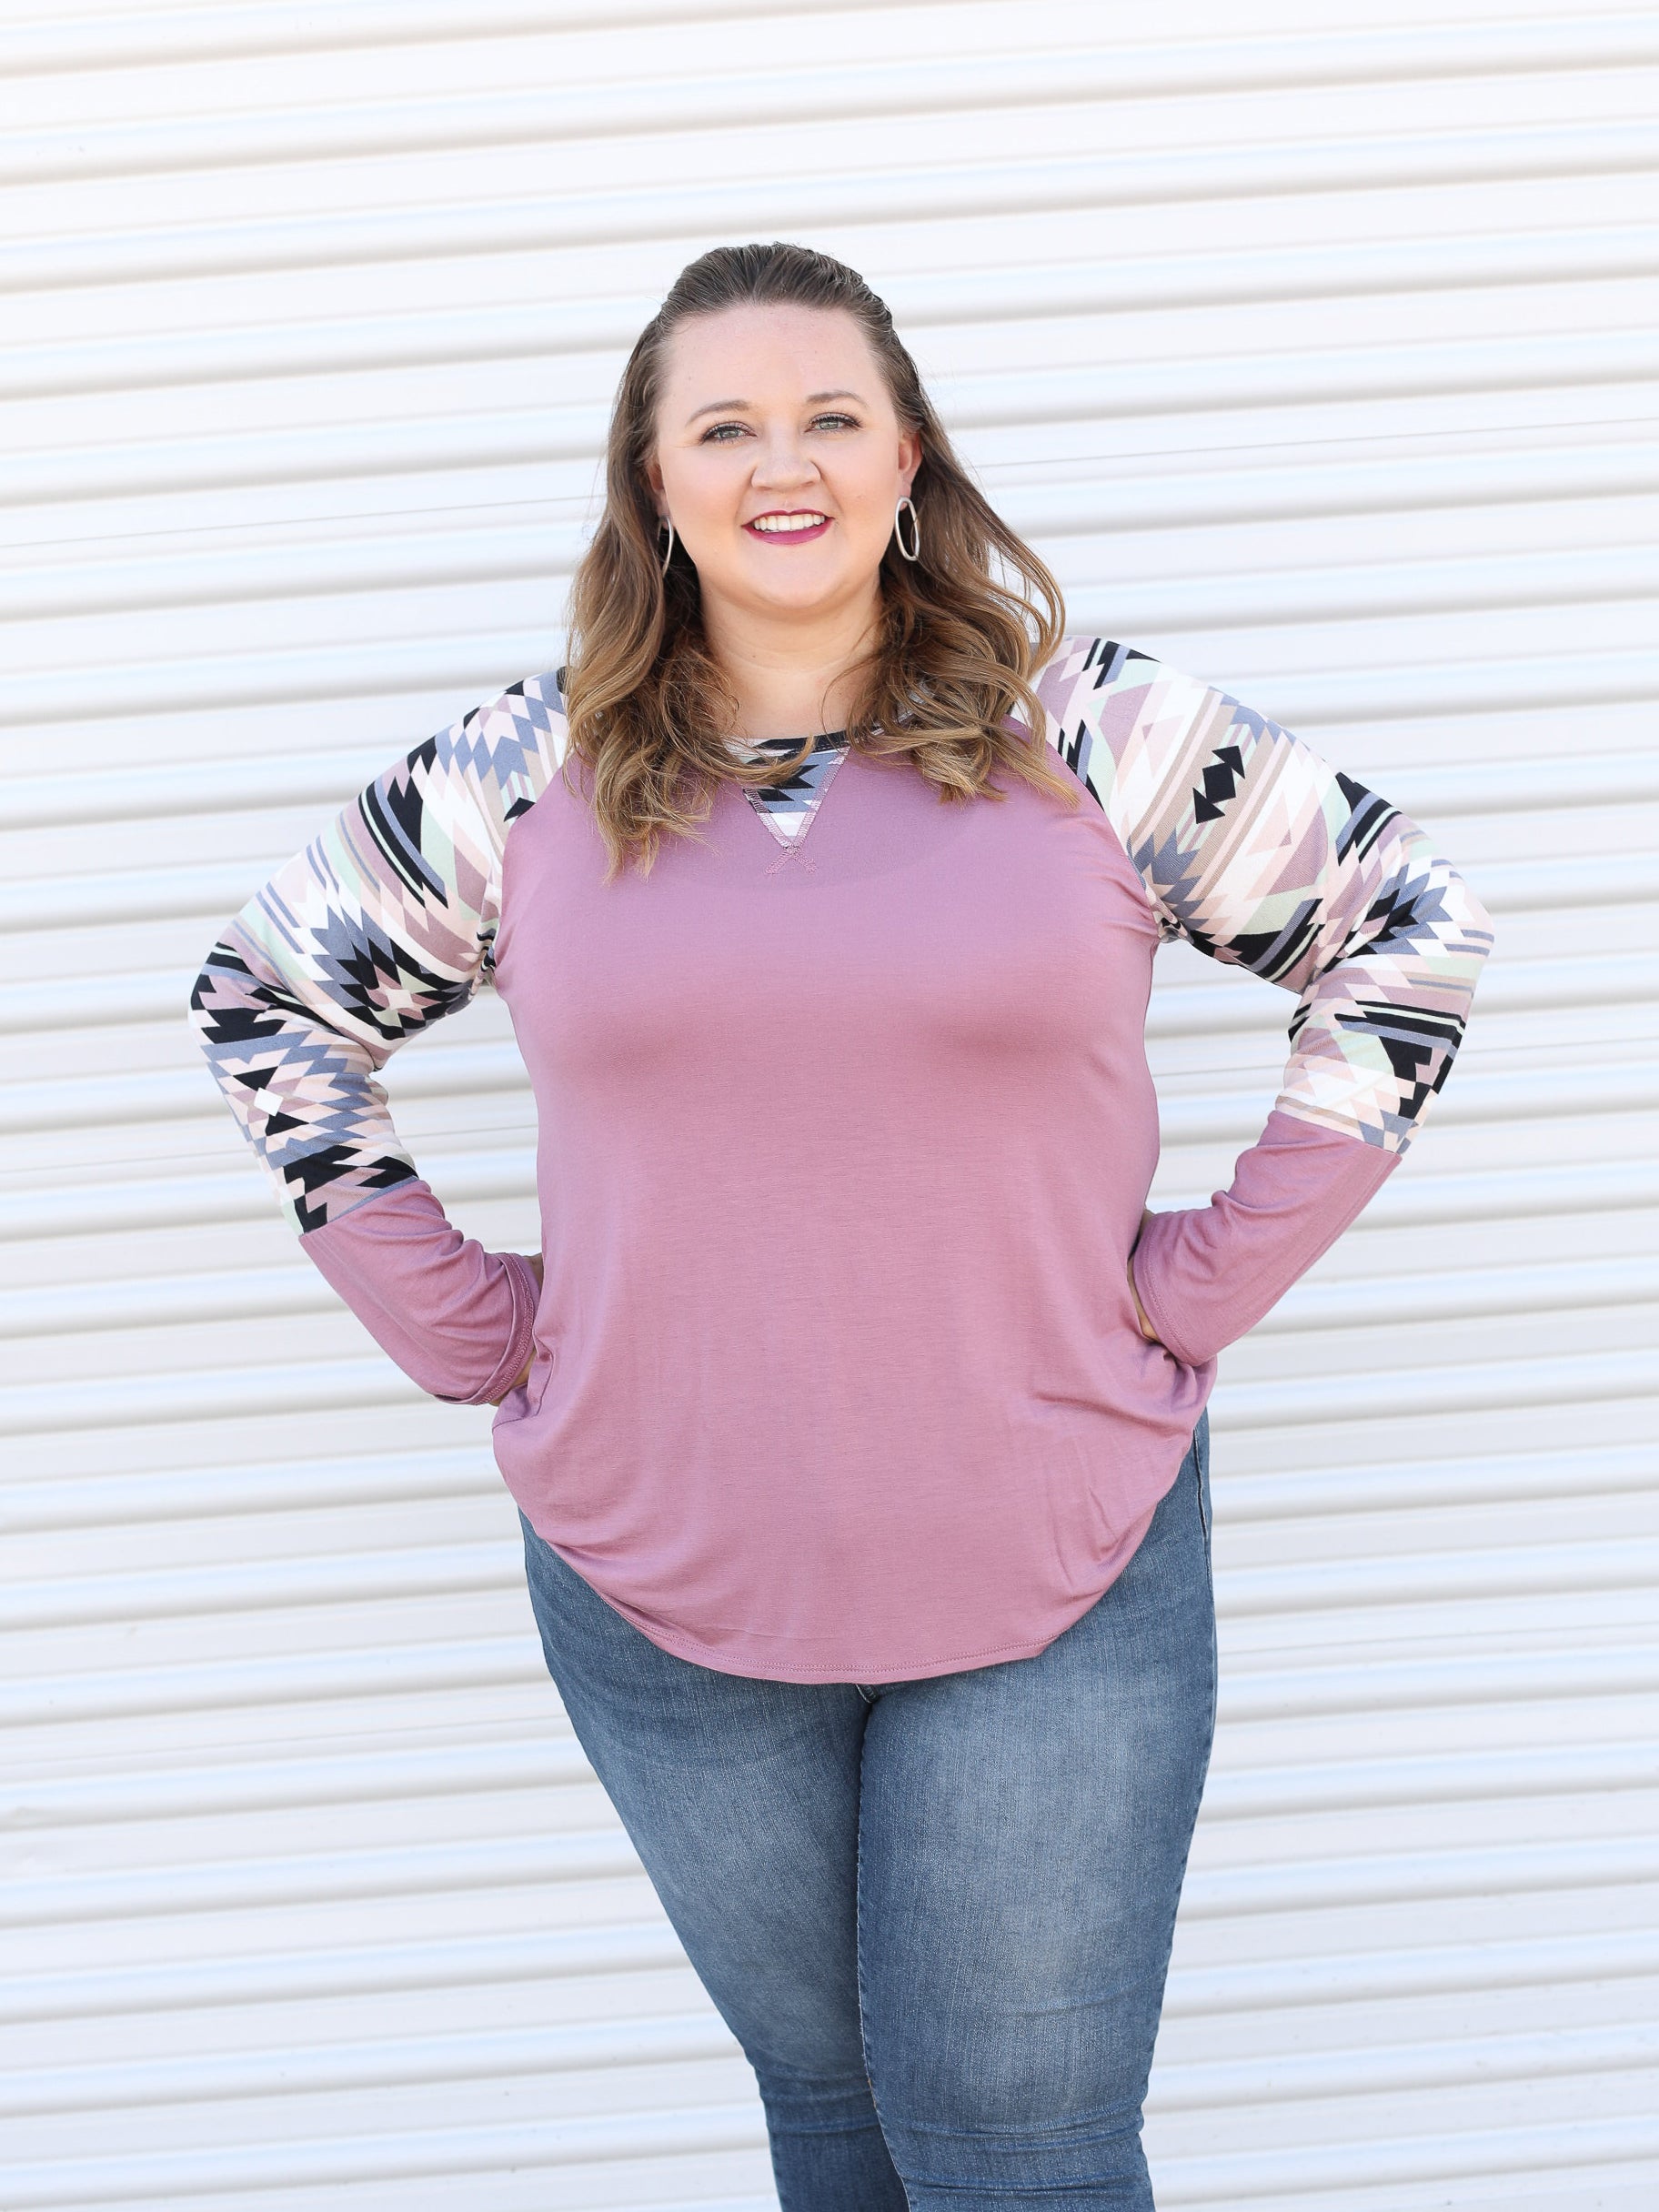 Stretchy long sleeve pink top with colorful aztec print along the sleeves